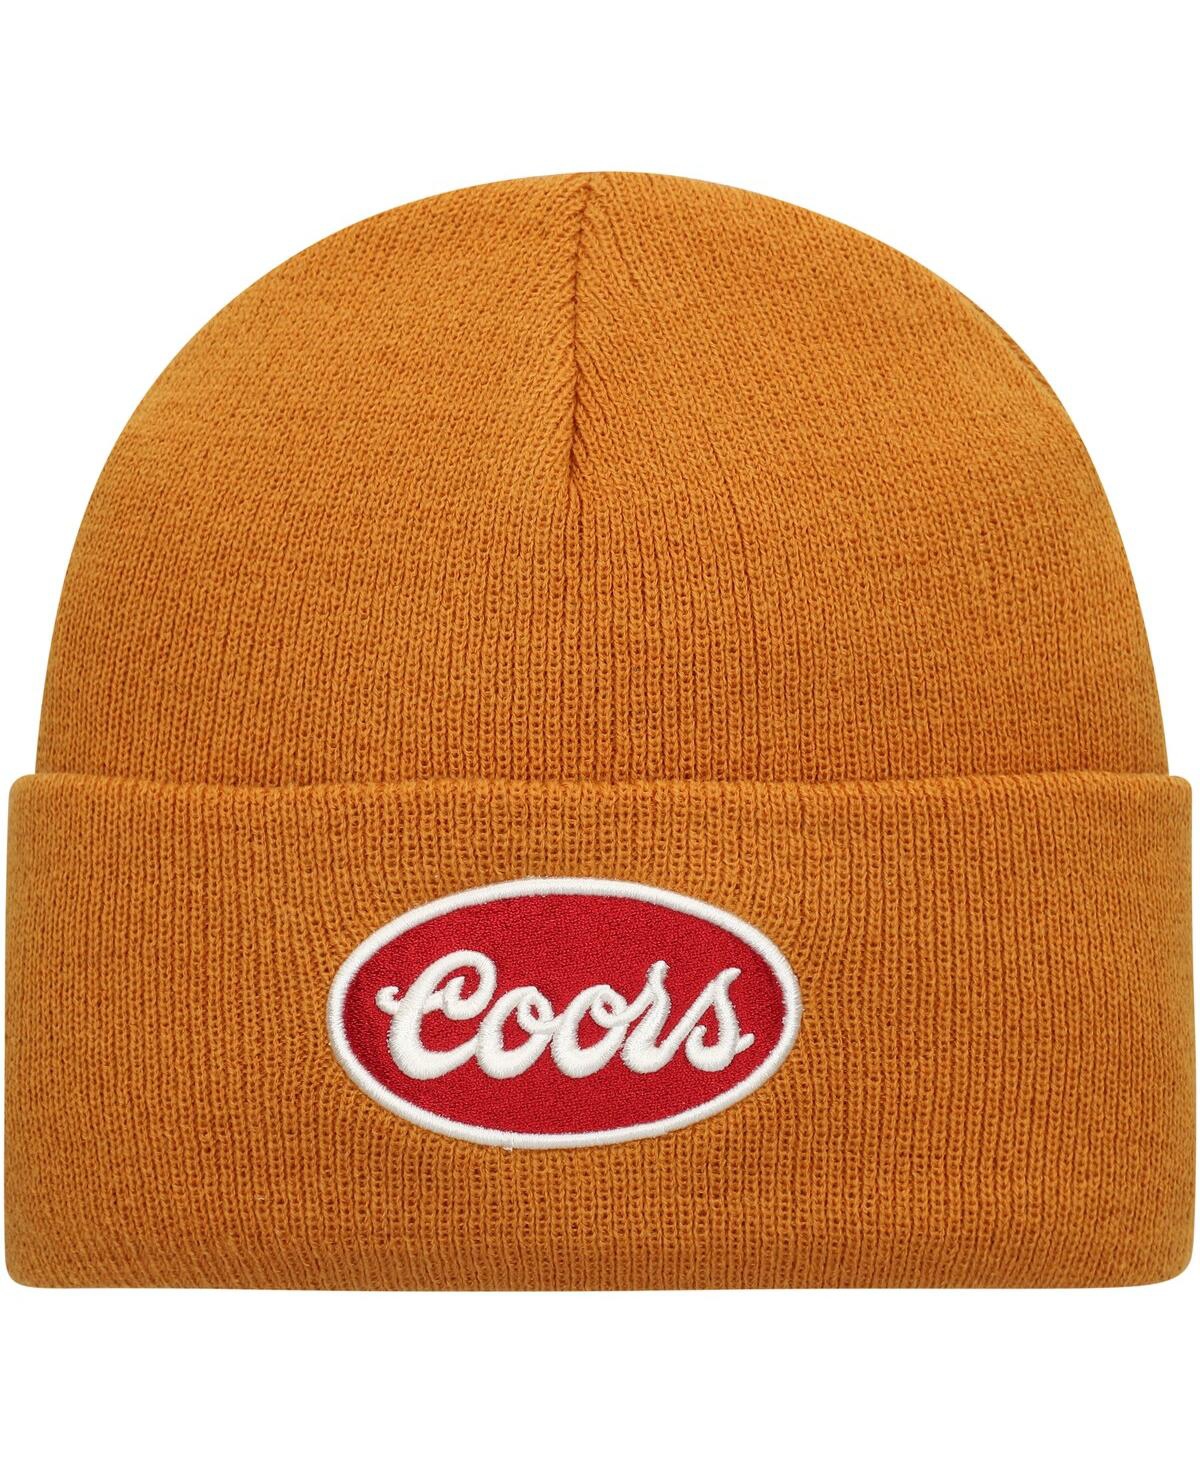 Men's American Needle Brown Coors Cuffed Knit Hat - Brown